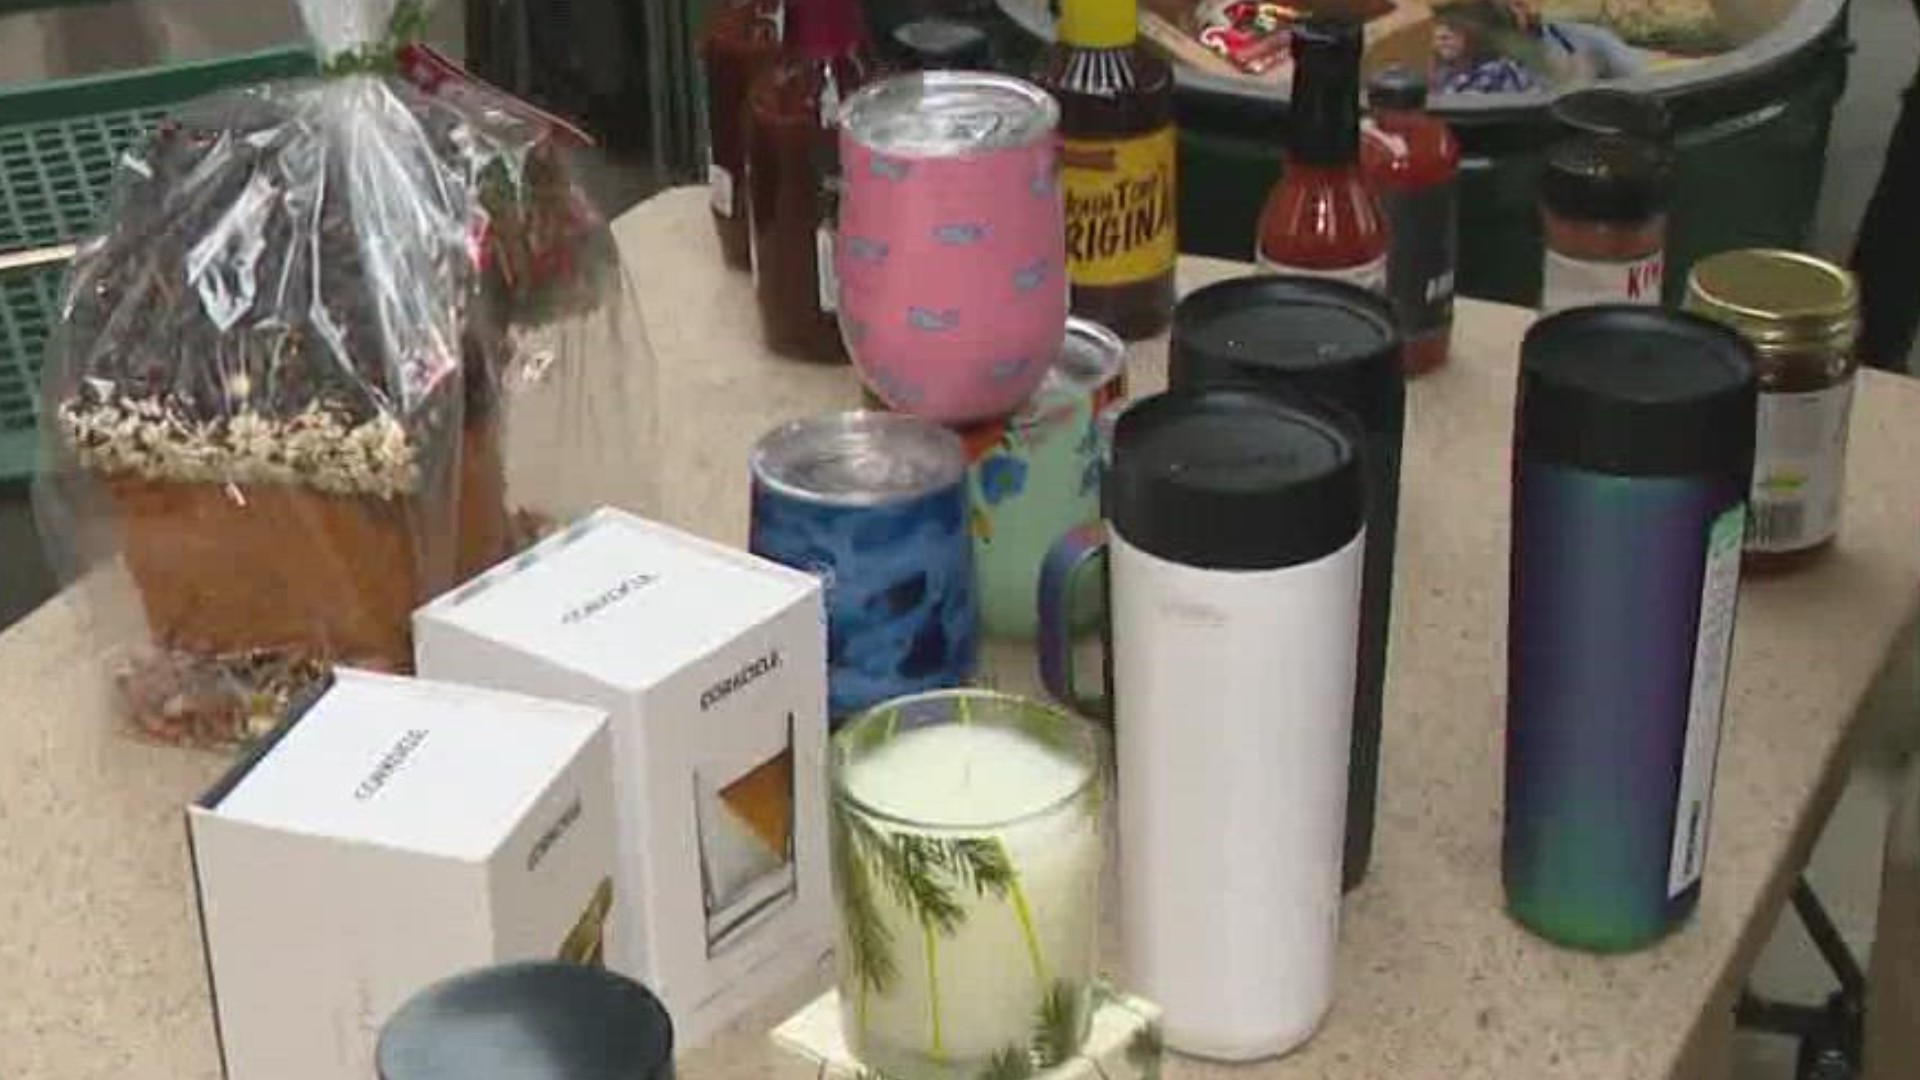 Christmas in coming up fast, and Pat shared his gift ideas for this year on 13Sunrise.